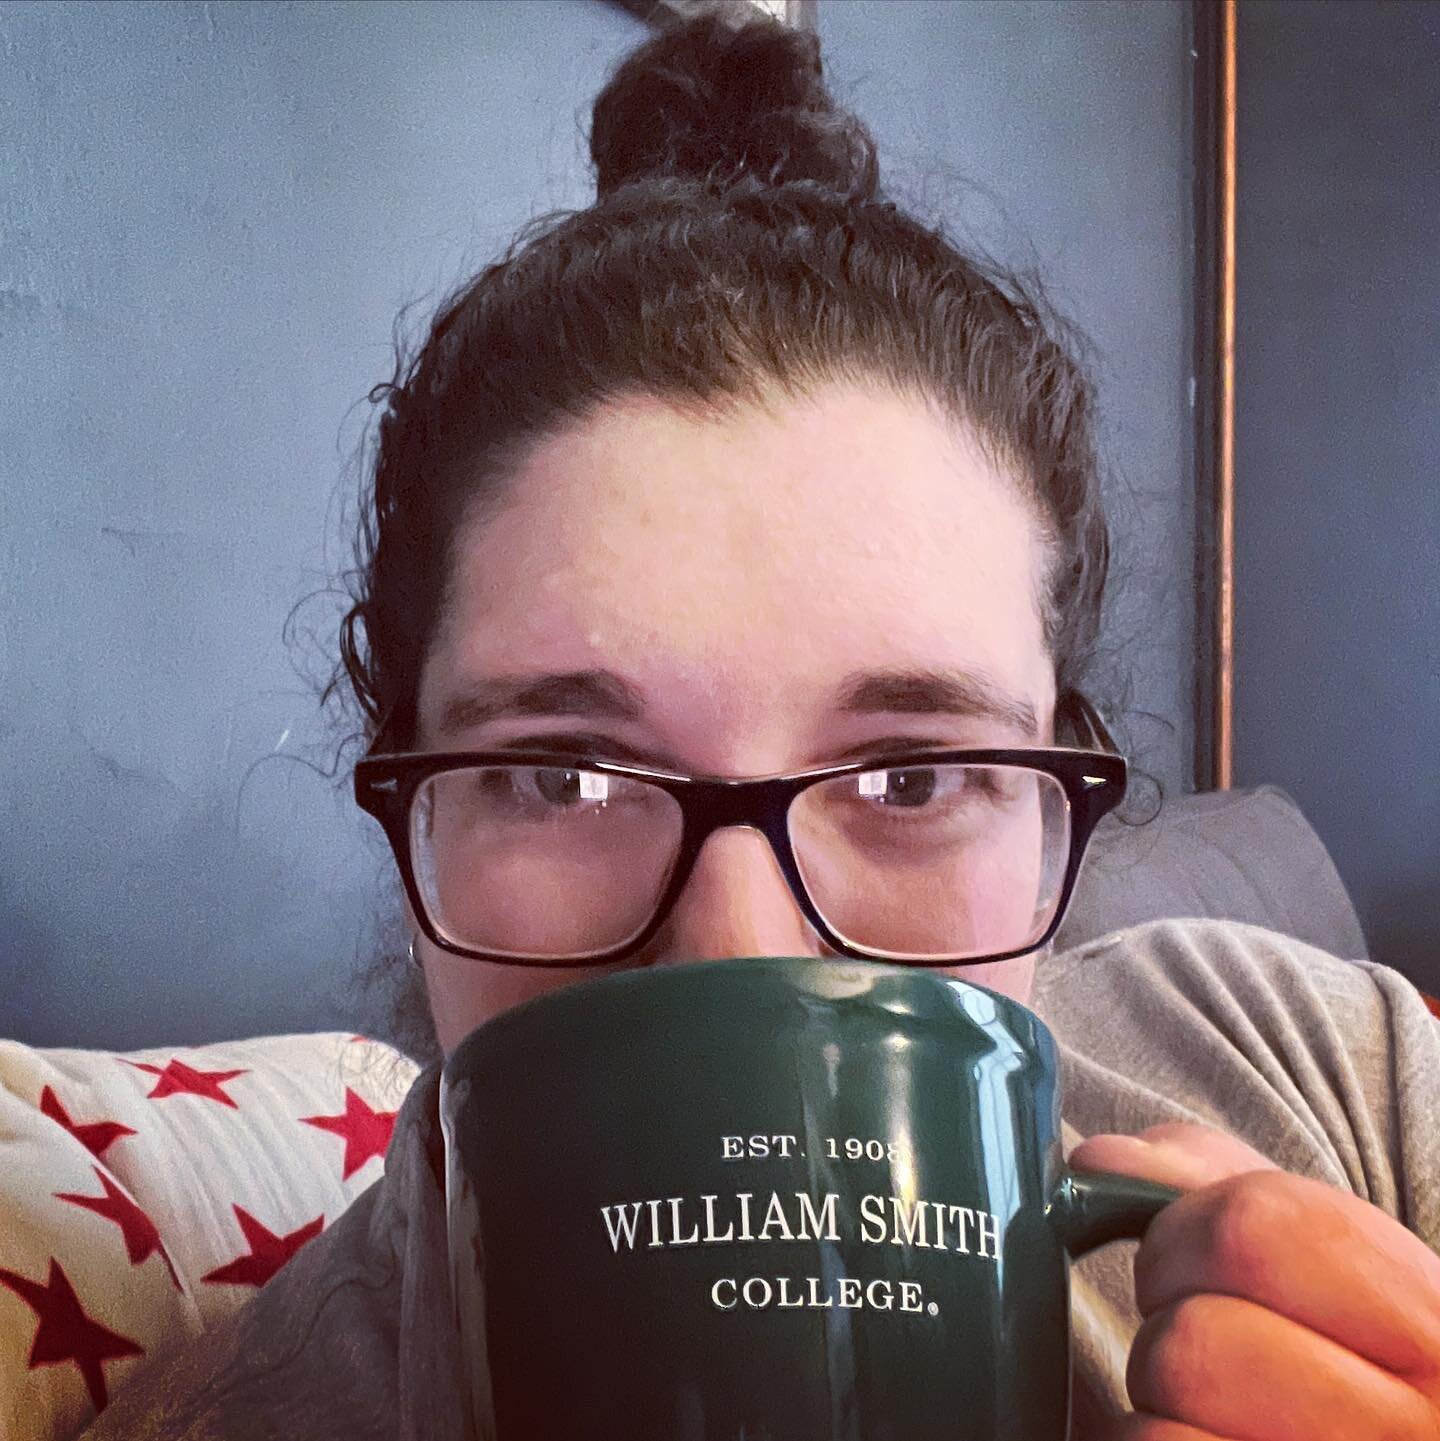 Sometimes being a business owner means working from your couch in your PJs, with no contacts and your hair a mess. At least there&rsquo;s wine in that mug!